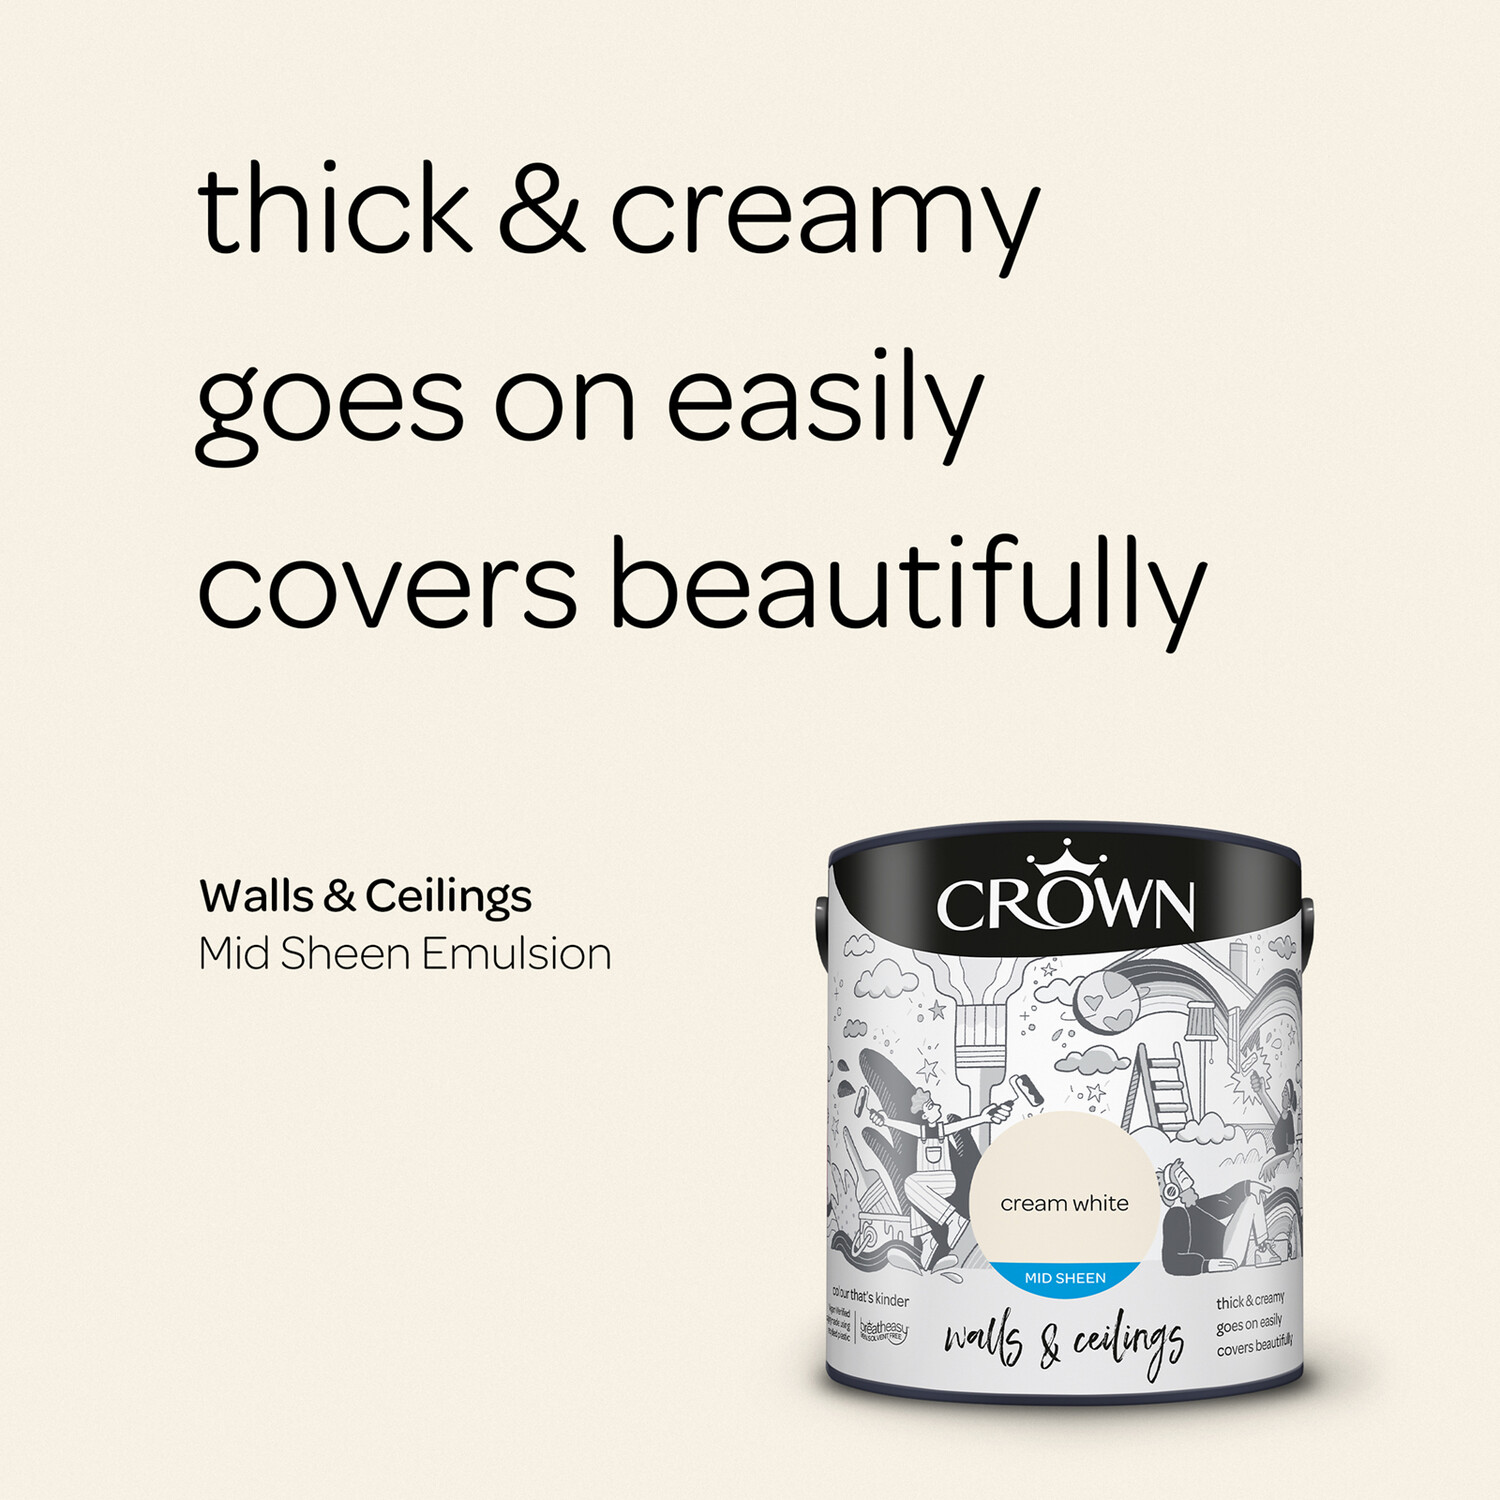 Crown Walls & Ceilings Cream White Mid Sheen Emulsion Paint 2.5L Image 8